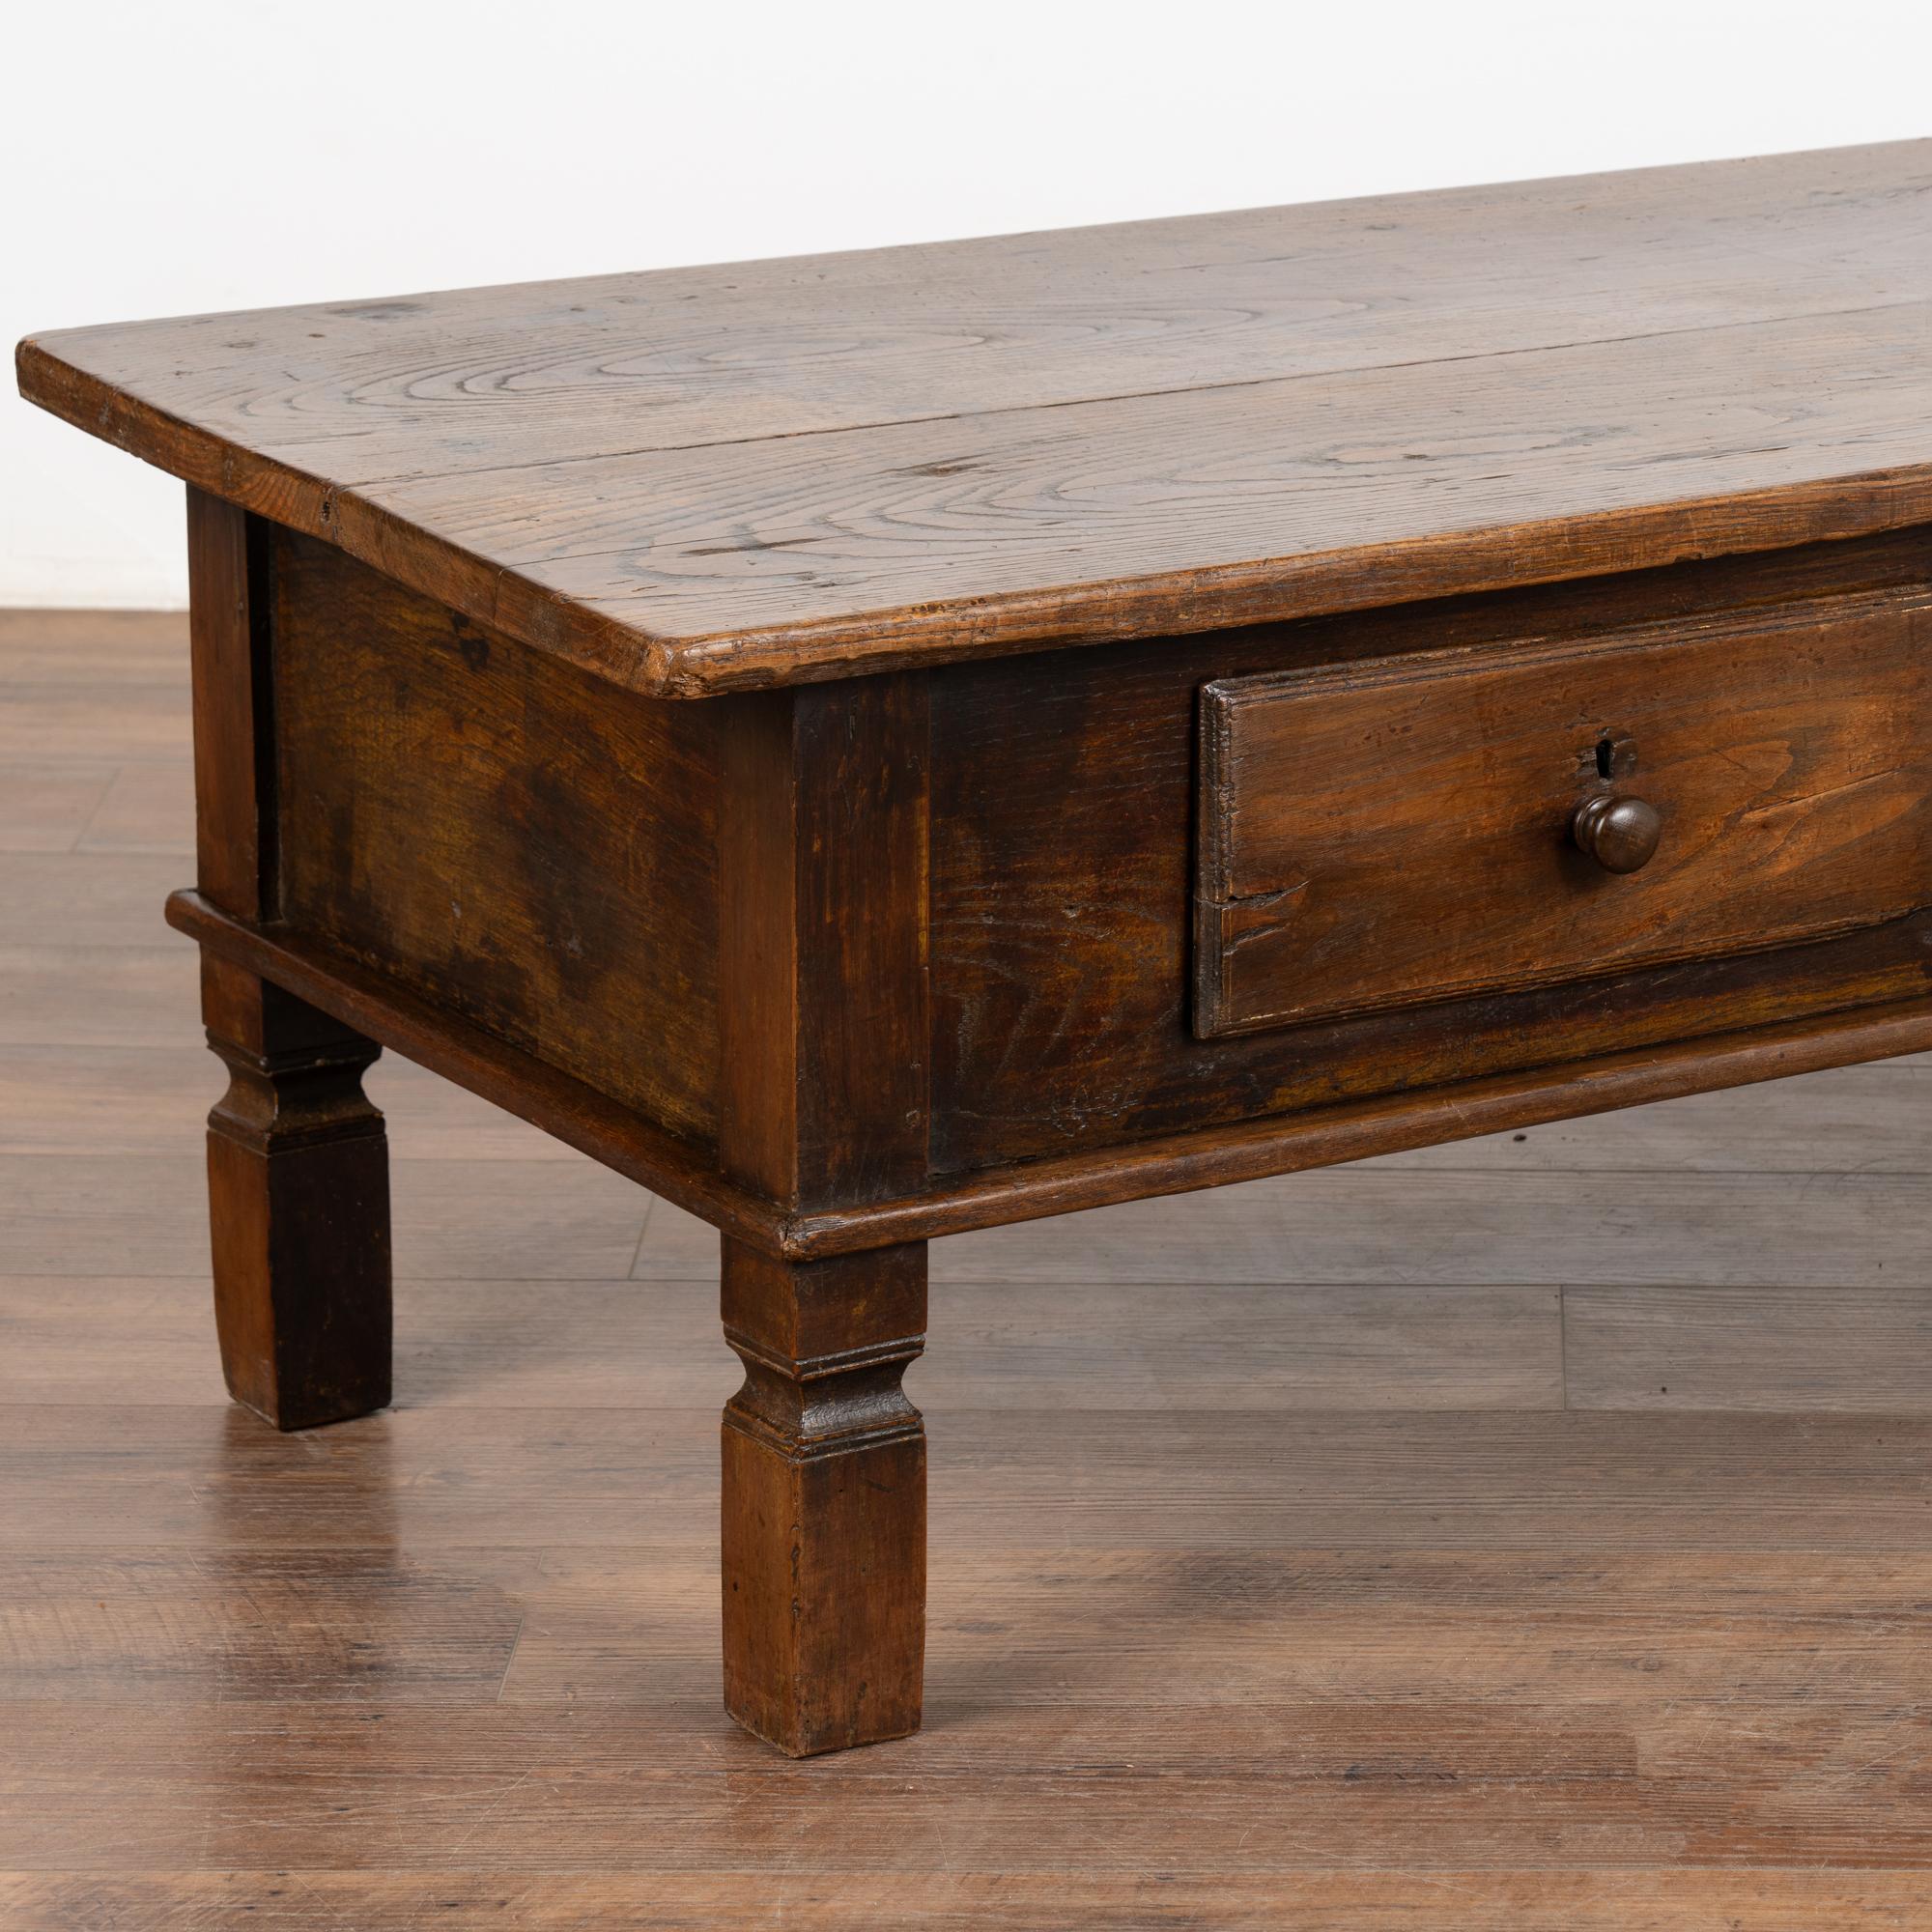 Two Drawer French Country Oak Coffee Table, circa 1820-40 For Sale 2